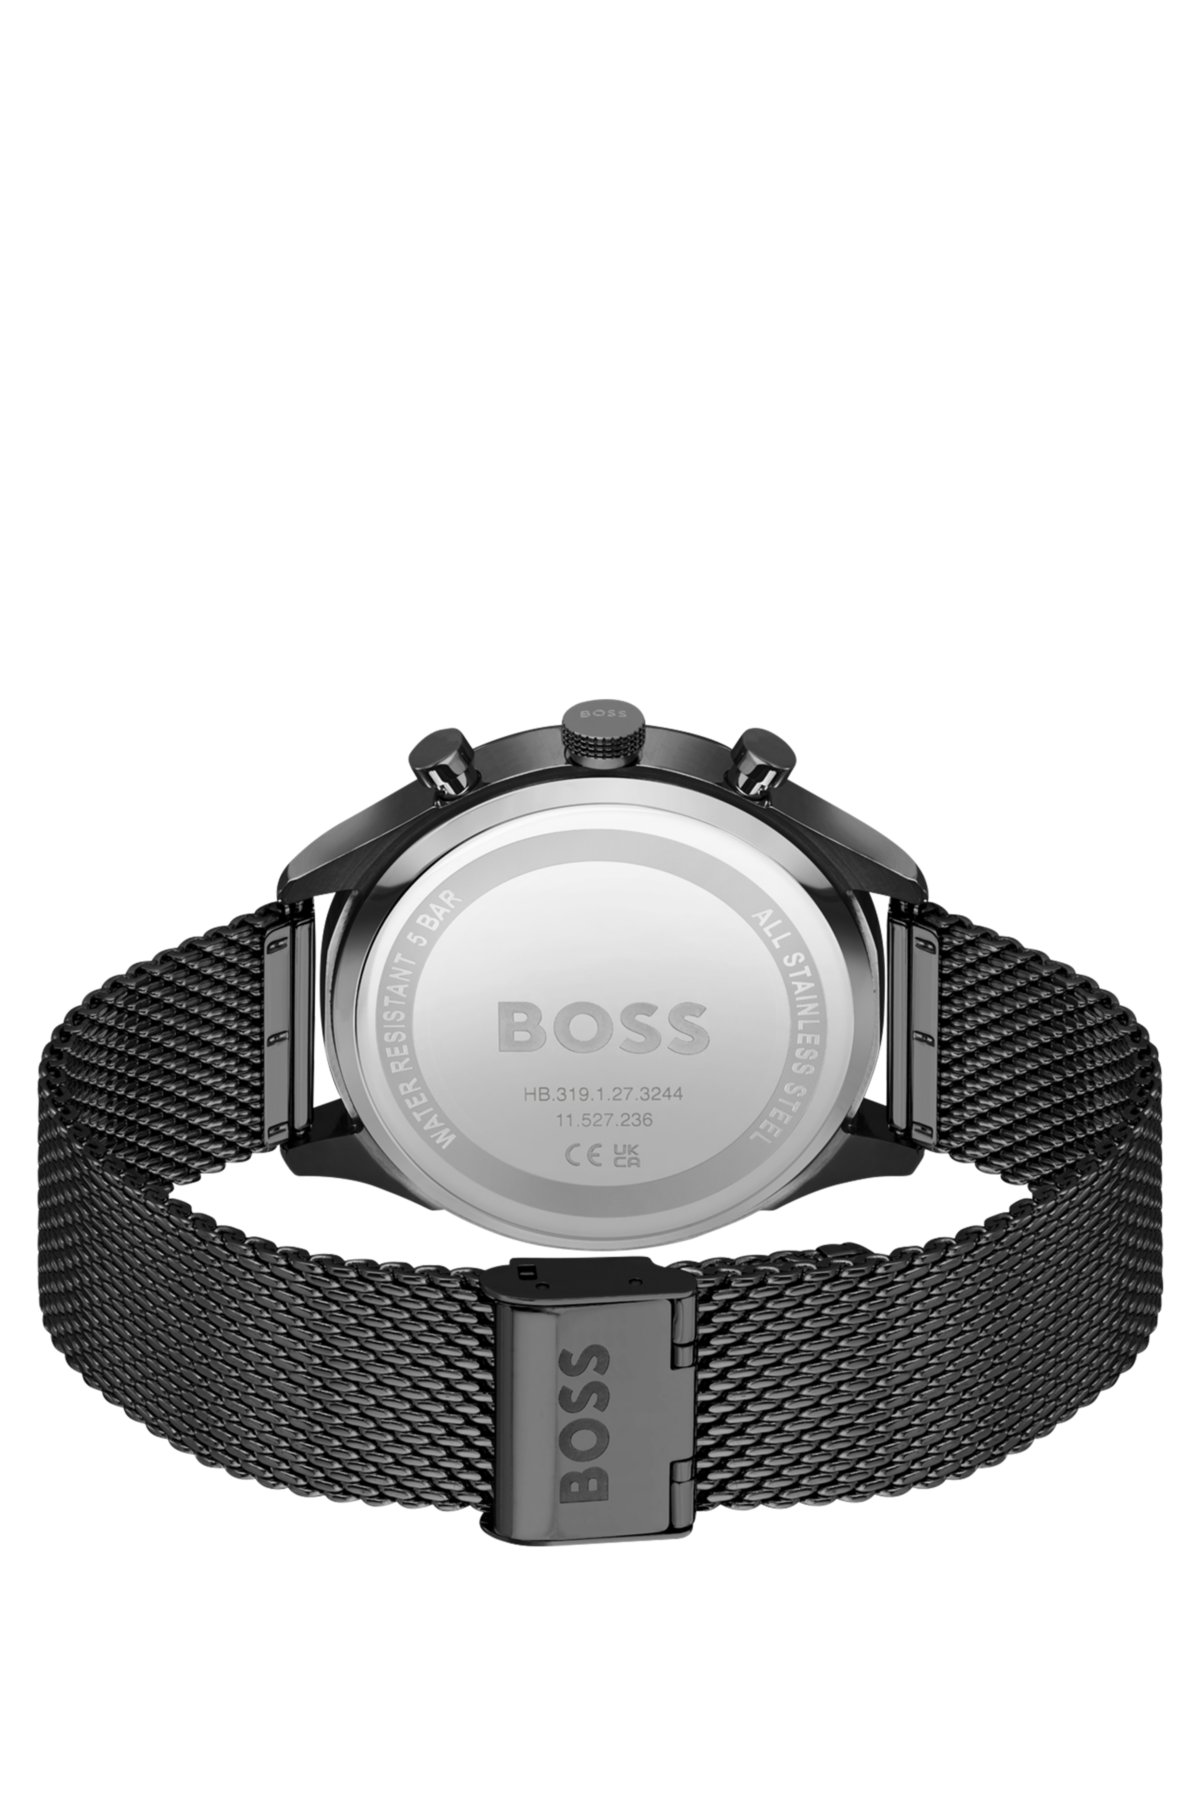 BOSS - bracelet mesh watch with chronograph Black-plated